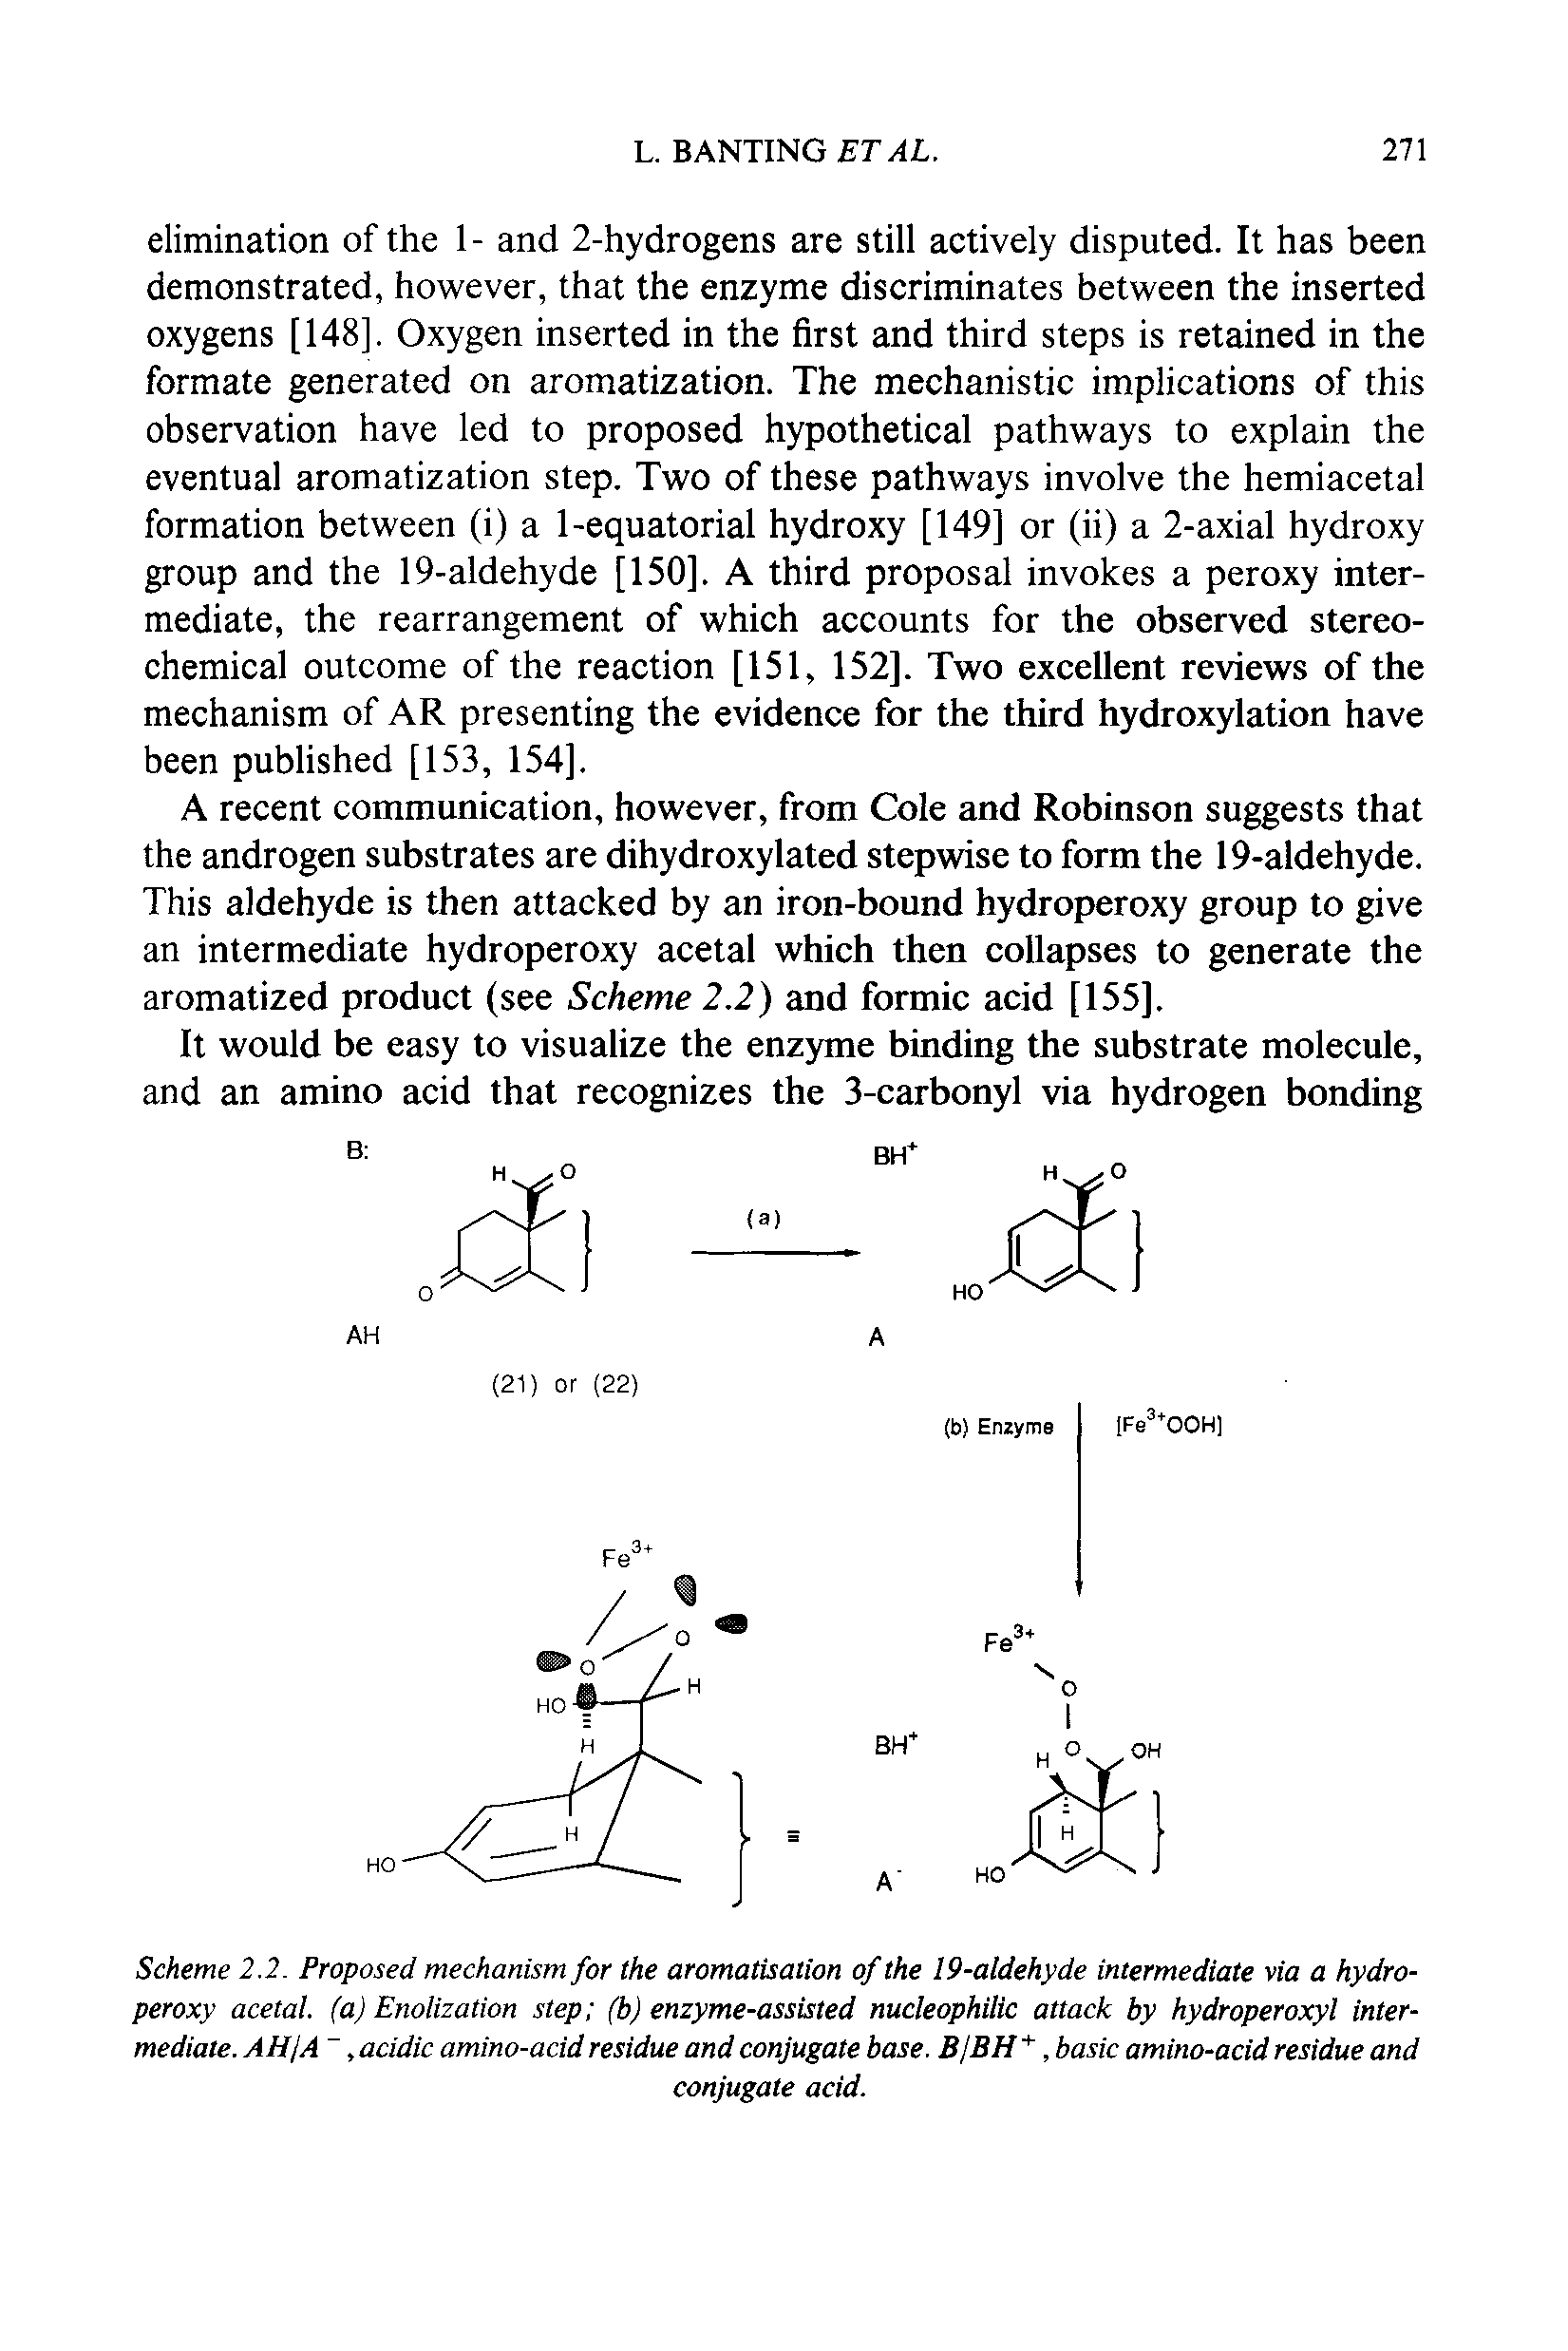 Scheme 2.2. Proposed mechanism for the aromatisation of the 19-aldehyde intermediate via a hydroperoxy acetal, (a) Enolization step (b) enzyme-assisted nucleophilic attack by hydroperoxyl intermediate. AH A, acidic amino-acid residue and conjugate base. BjBH, basic amino-acid residue and...